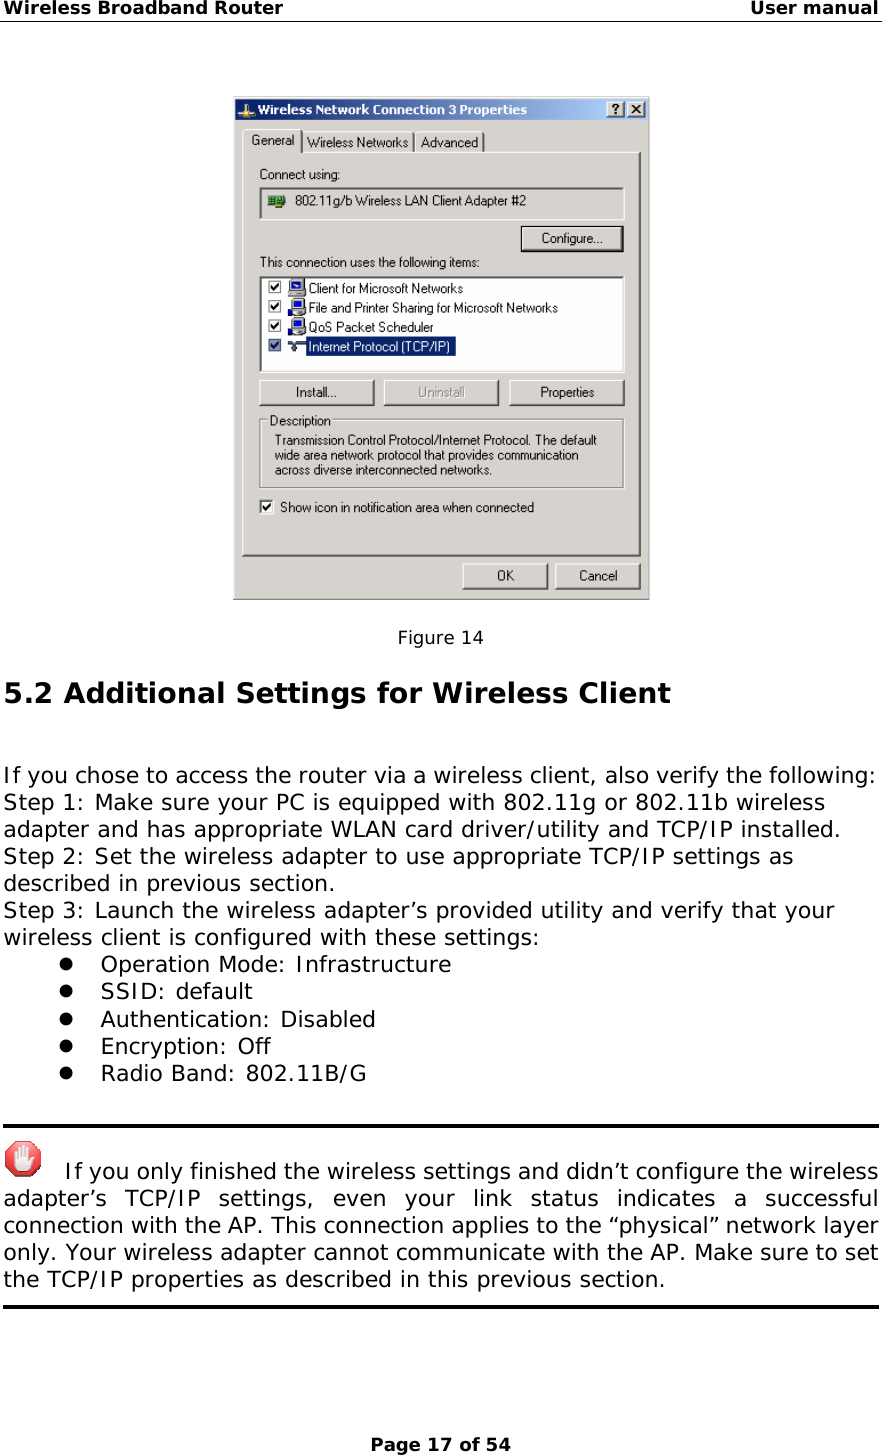 Wireless Broadband Router                                                   User manual Page 17 of 54    Figure 14 5.2 Additional Settings for Wireless Client If you chose to access the router via a wireless client, also verify the following: Step 1: Make sure your PC is equipped with 802.11g or 802.11b wireless adapter and has appropriate WLAN card driver/utility and TCP/IP installed. Step 2: Set the wireless adapter to use appropriate TCP/IP settings as described in previous section. Step 3: Launch the wireless adapter’s provided utility and verify that your wireless client is configured with these settings: z Operation Mode: Infrastructure z SSID: default z Authentication: Disabled z Encryption: Off z Radio Band: 802.11B/G      If you only finished the wireless settings and didn’t configure the wireless adapter’s TCP/IP settings, even your link status indicates a successful connection with the AP. This connection applies to the “physical” network layer only. Your wireless adapter cannot communicate with the AP. Make sure to set the TCP/IP properties as described in this previous section.  